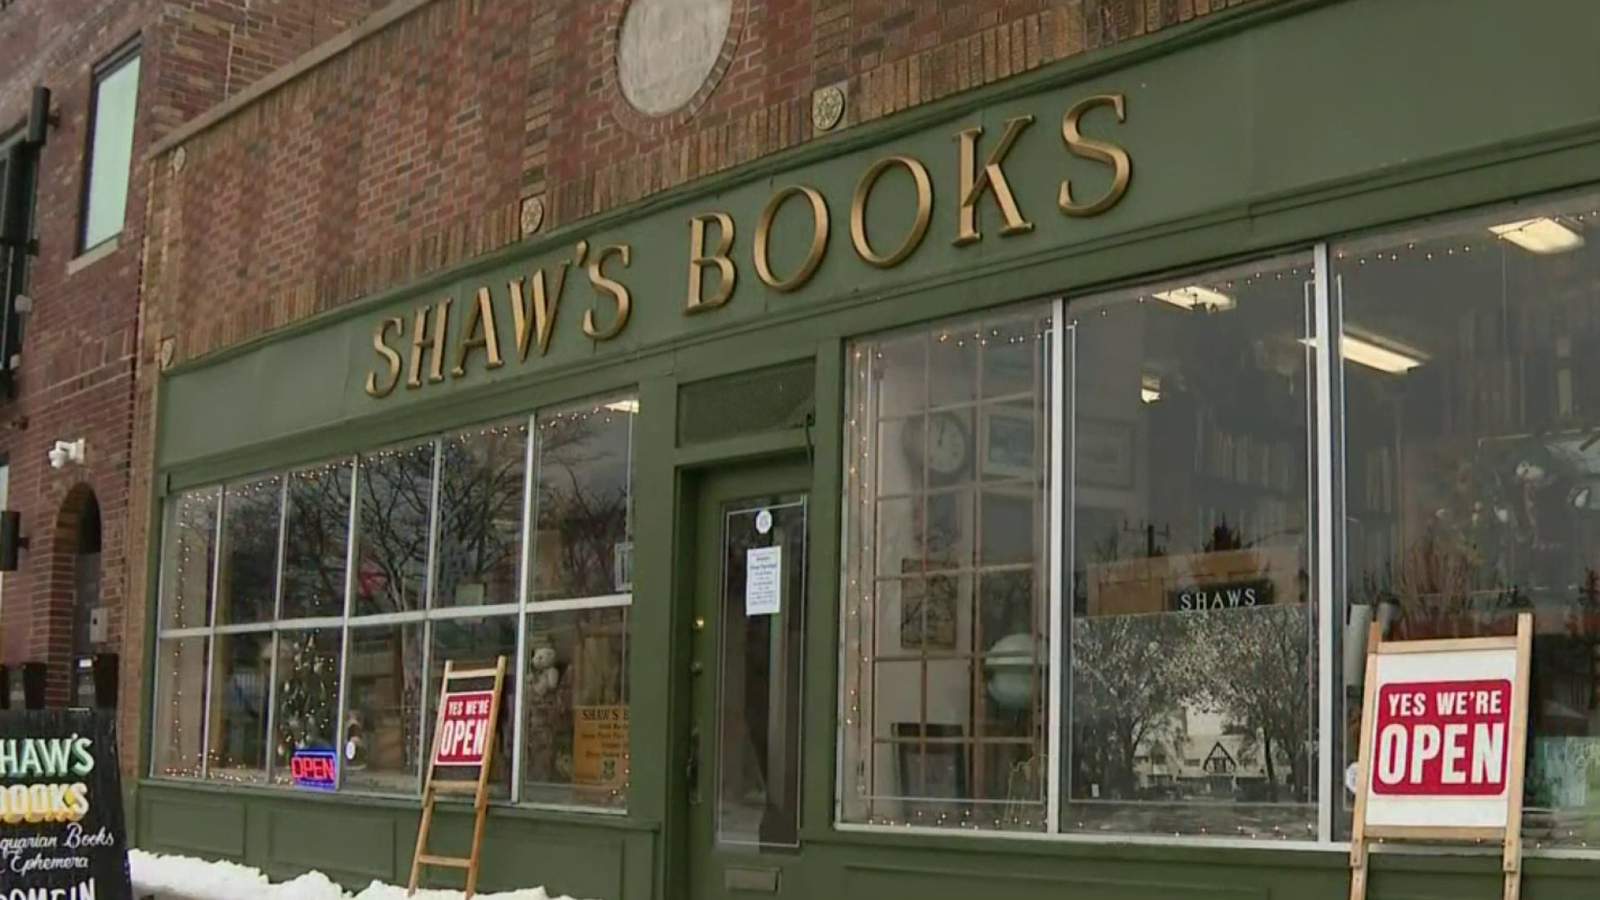 Retirement passion project turns into unique bookstore in Grosse Pointe Park